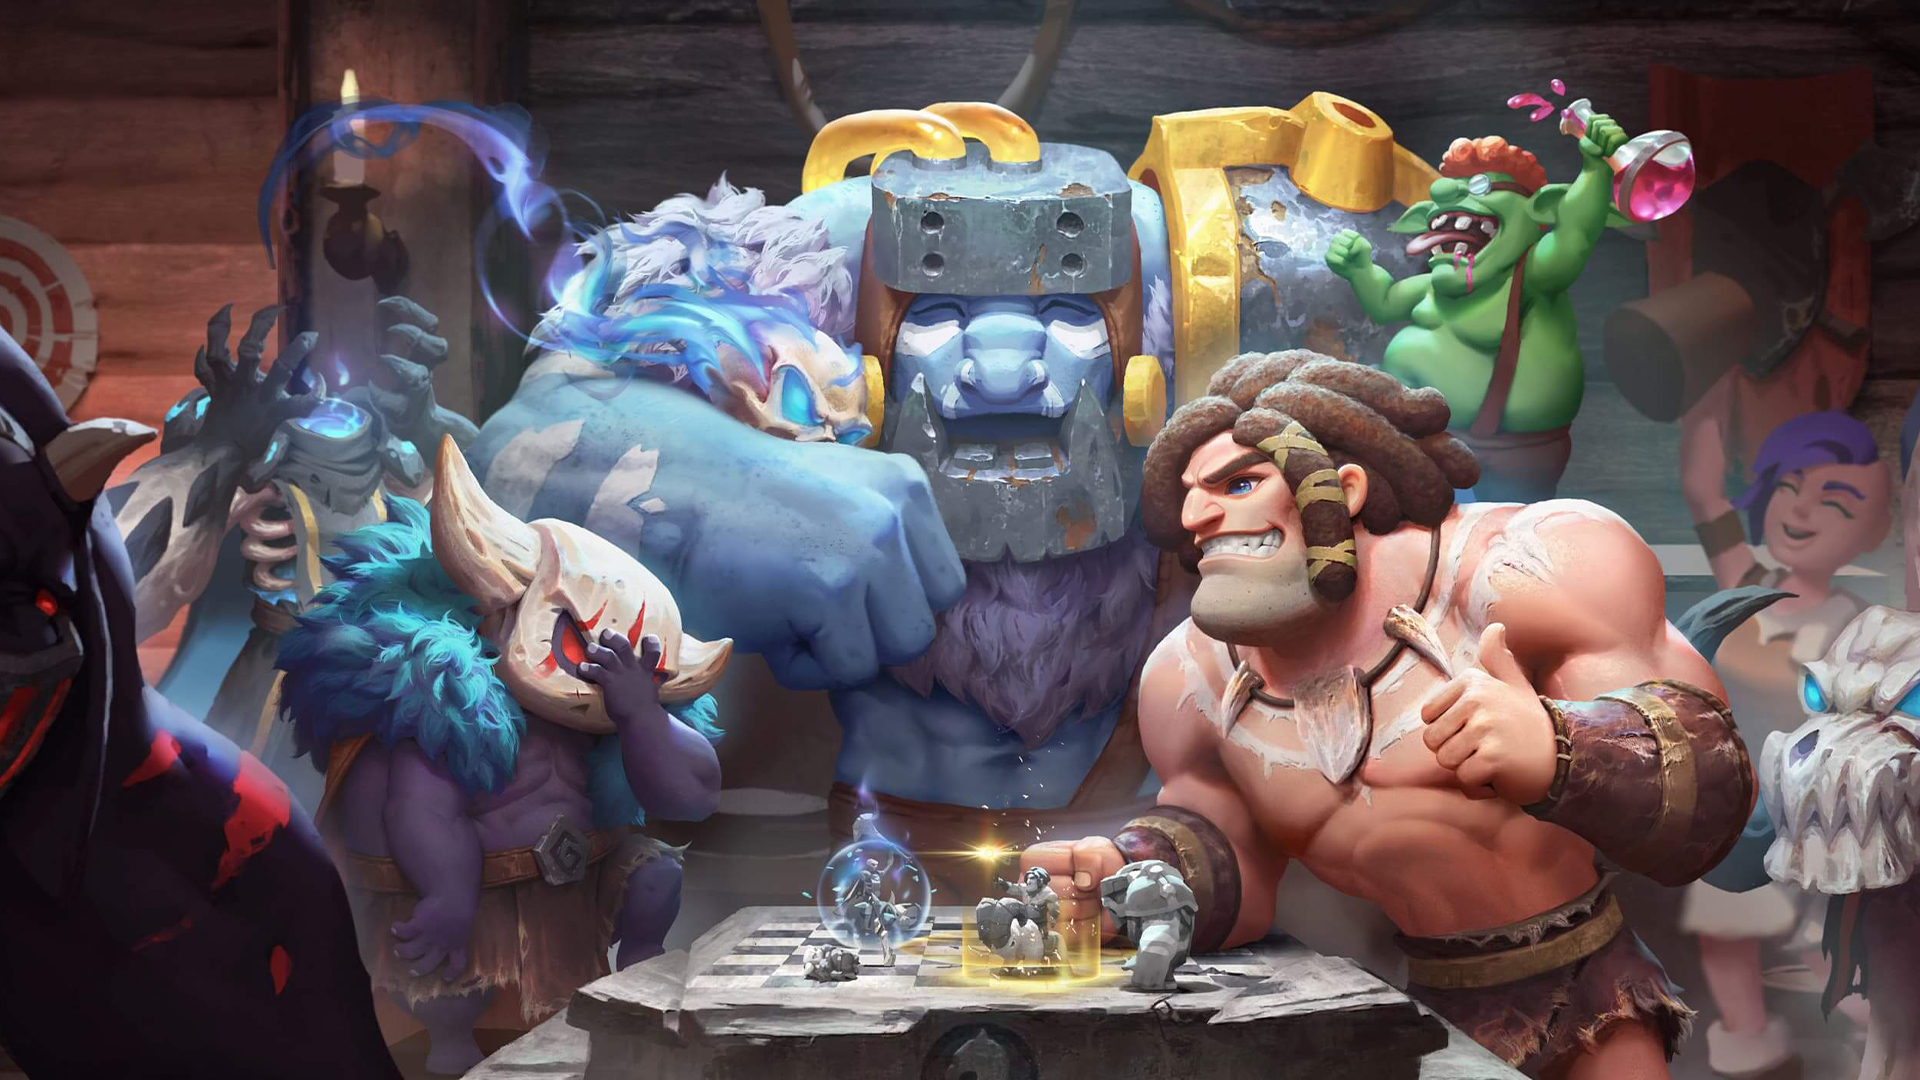 Auto Chess, A Dota 2 Mod, Is Getting Its Own MOBA Game. Wait, What